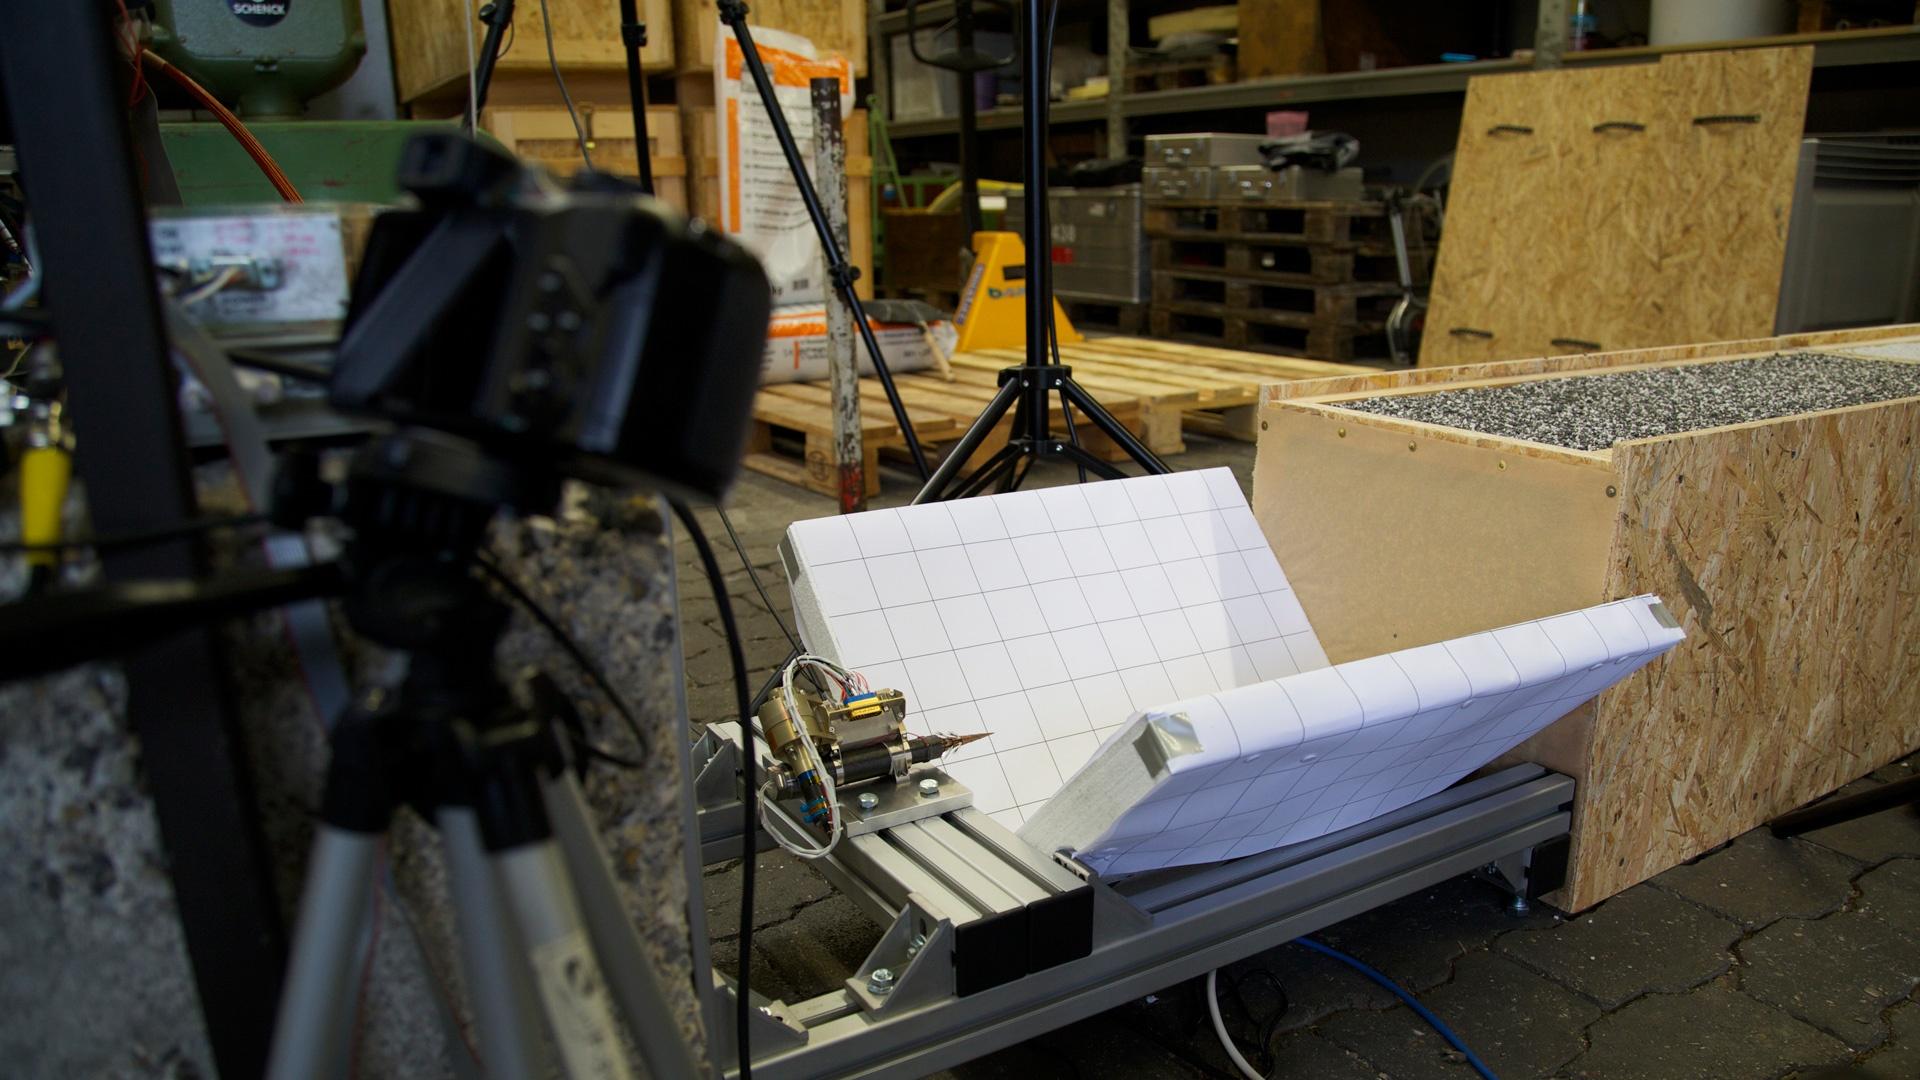 Engineers prepare a replica of the Philae lander harpoon to shoot into a target